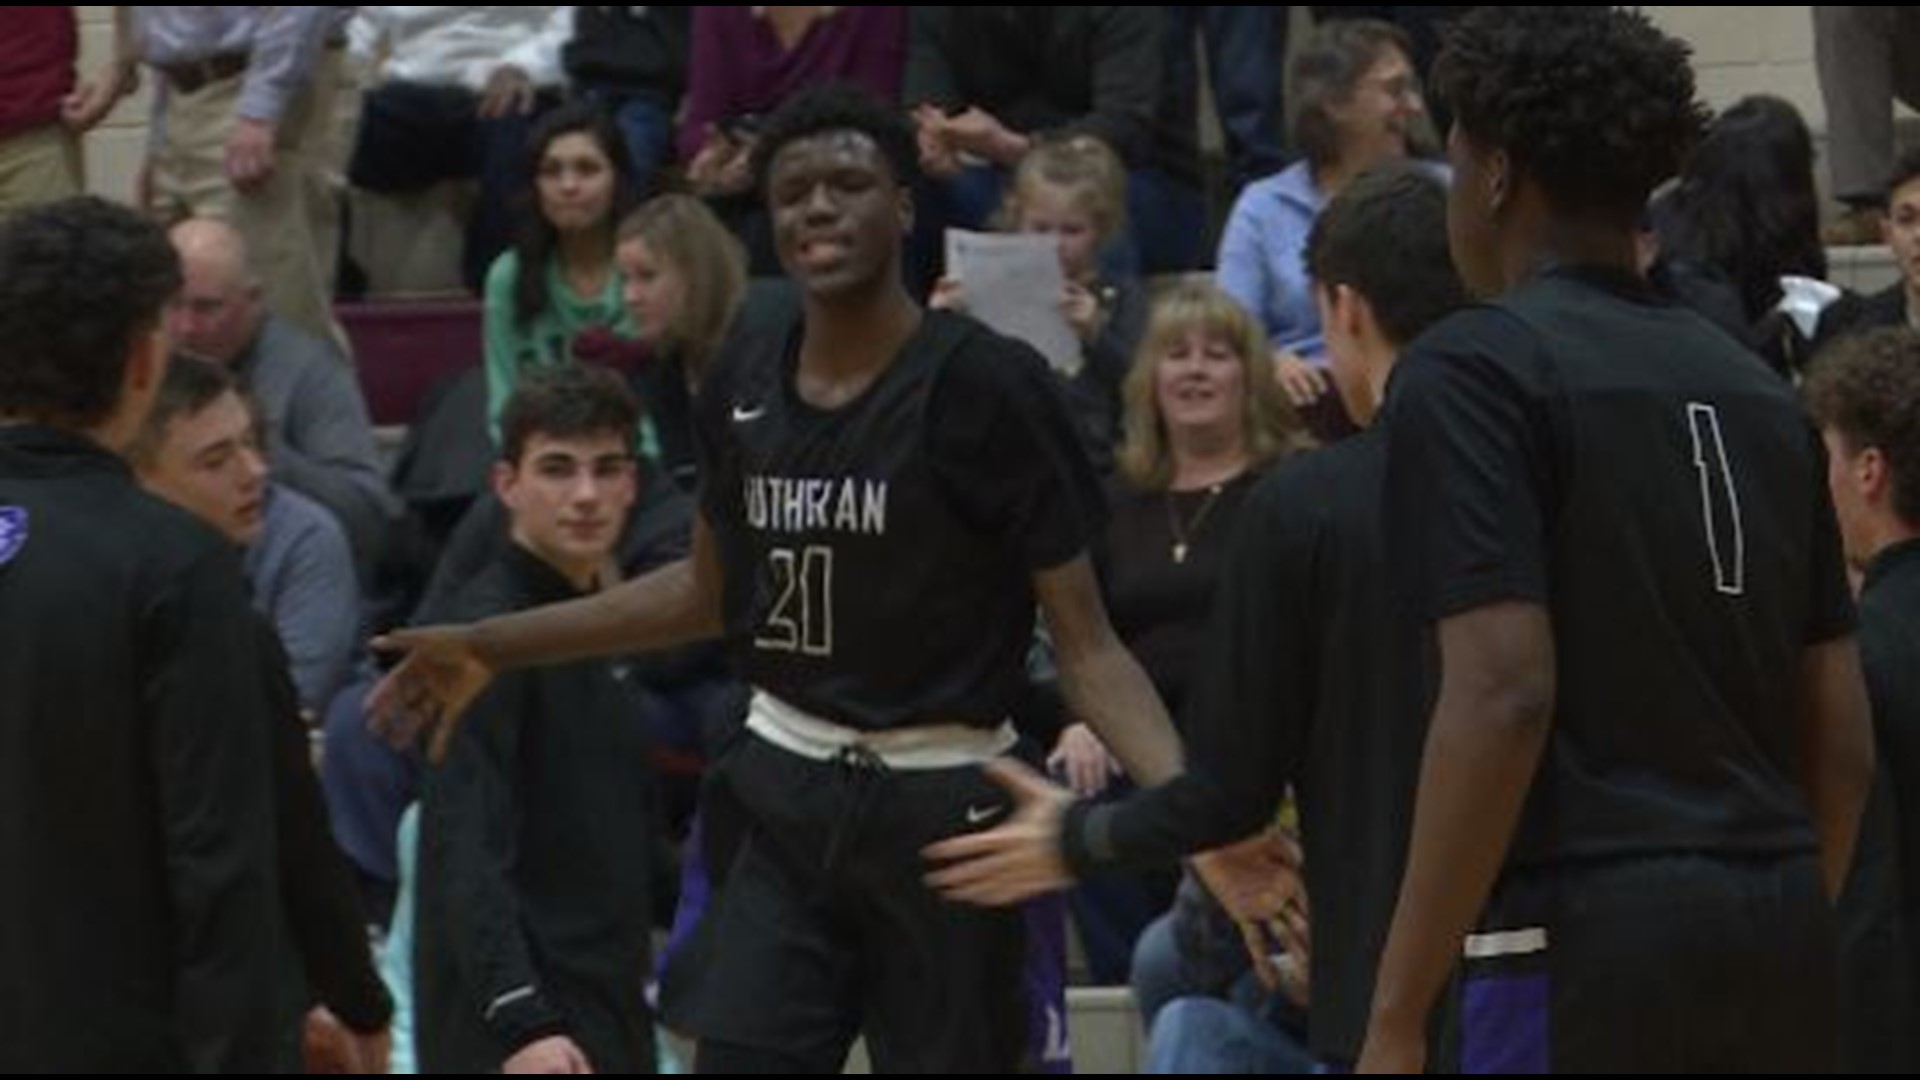 No. 4 Lutheran left no doubt in this 3A boys basketball matchup, taking down no. 5 Faith Christian 68-37 on Tuesday night in Arvada.